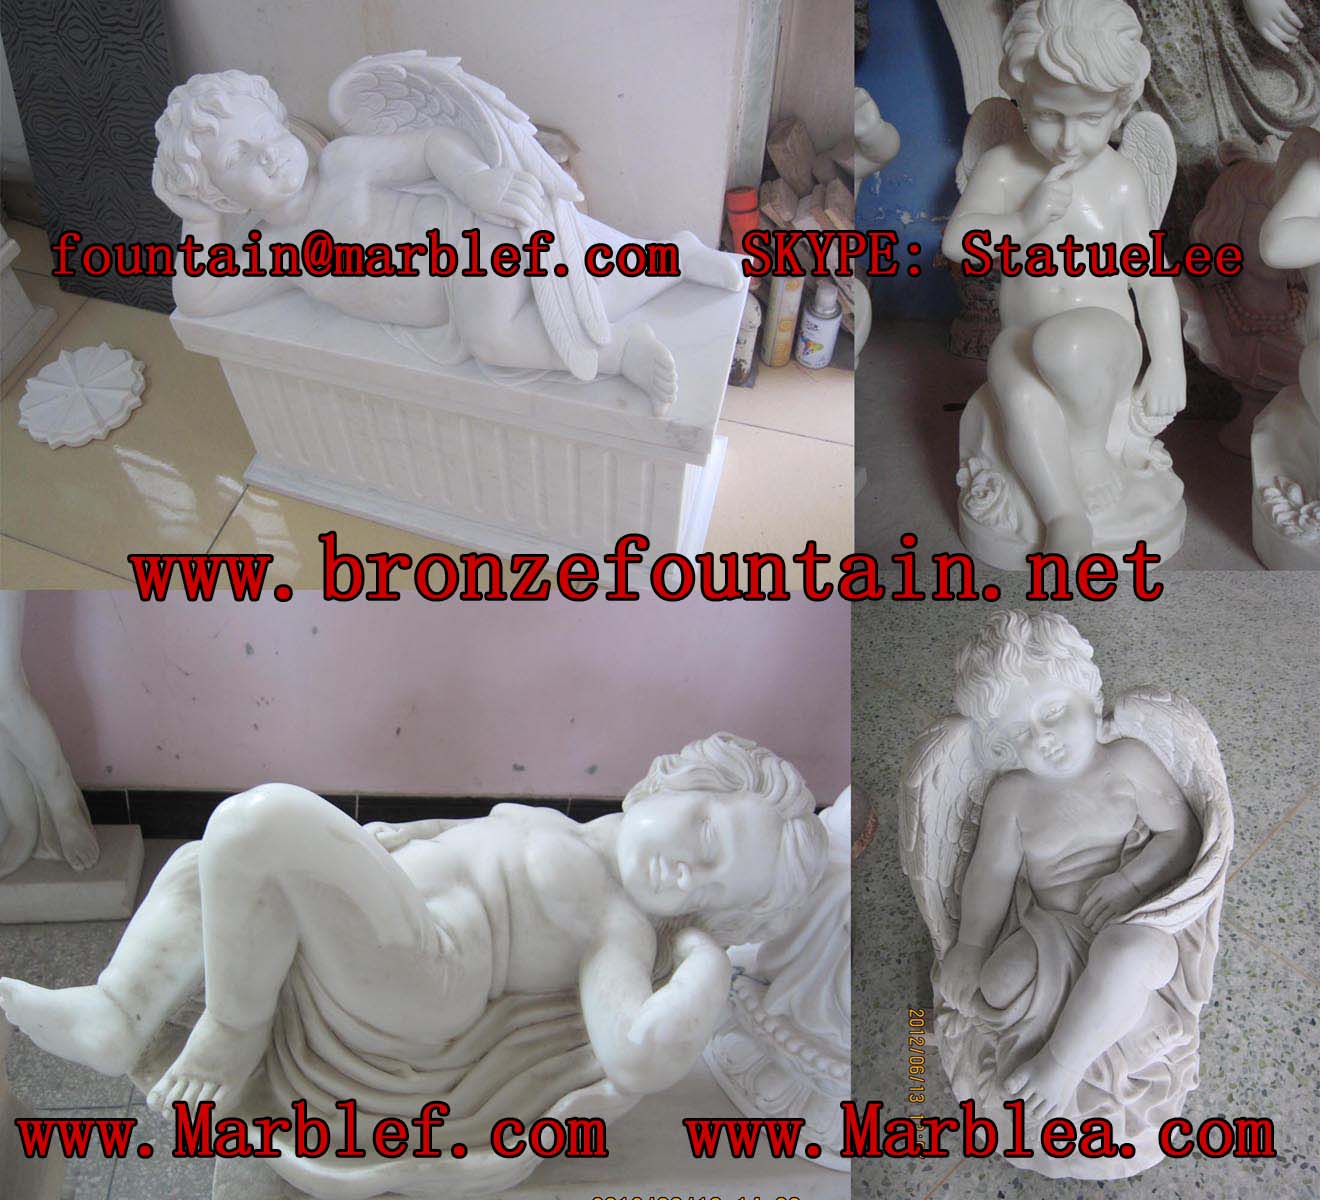 marble water fountains,cast stone fountains,marble large outdoor fountains